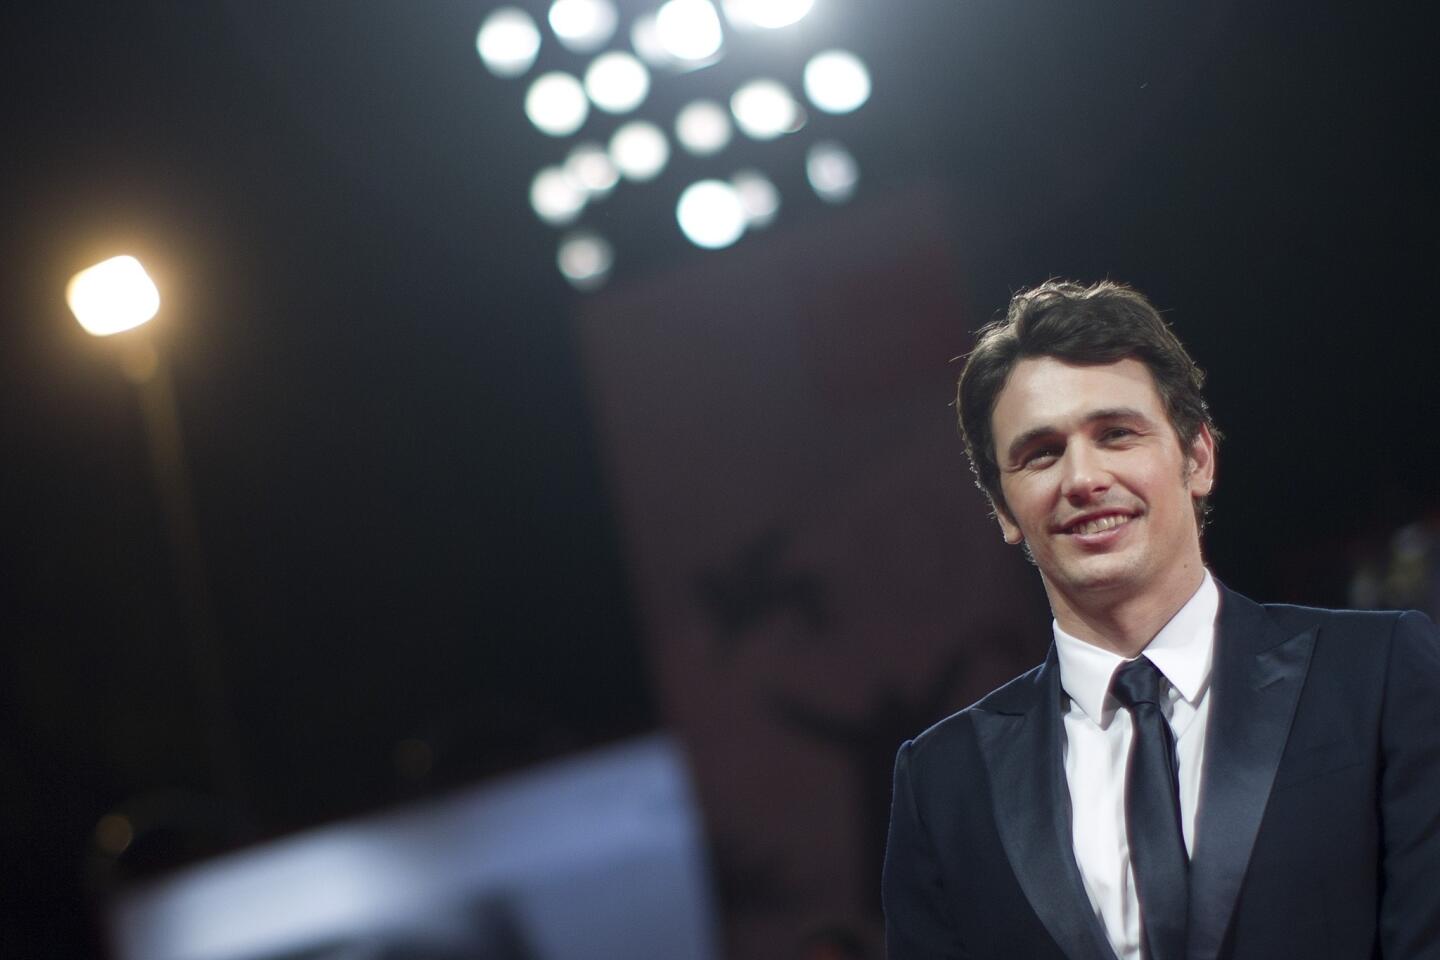 James Franco lashes out at critic after Broadway debut